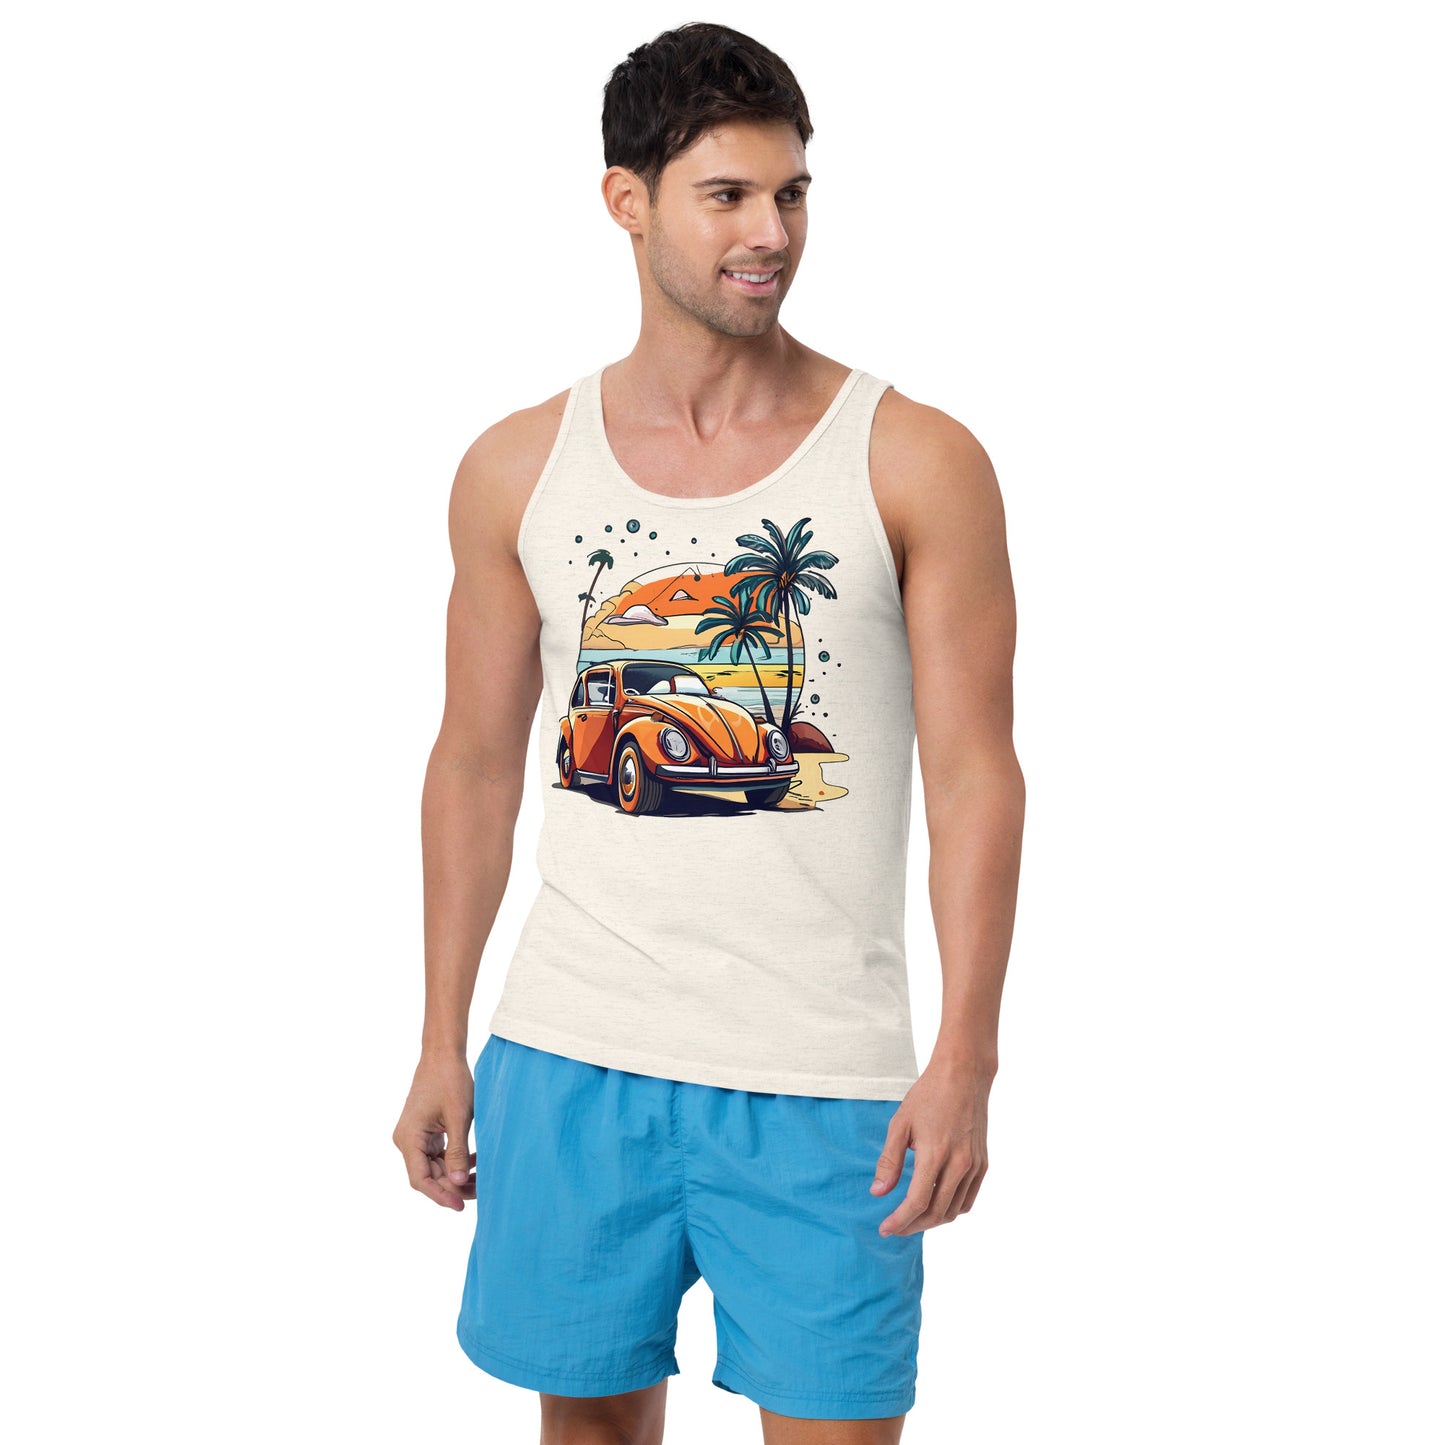 man with oatmeal tank top with picture of beetle car in front of palm trees 